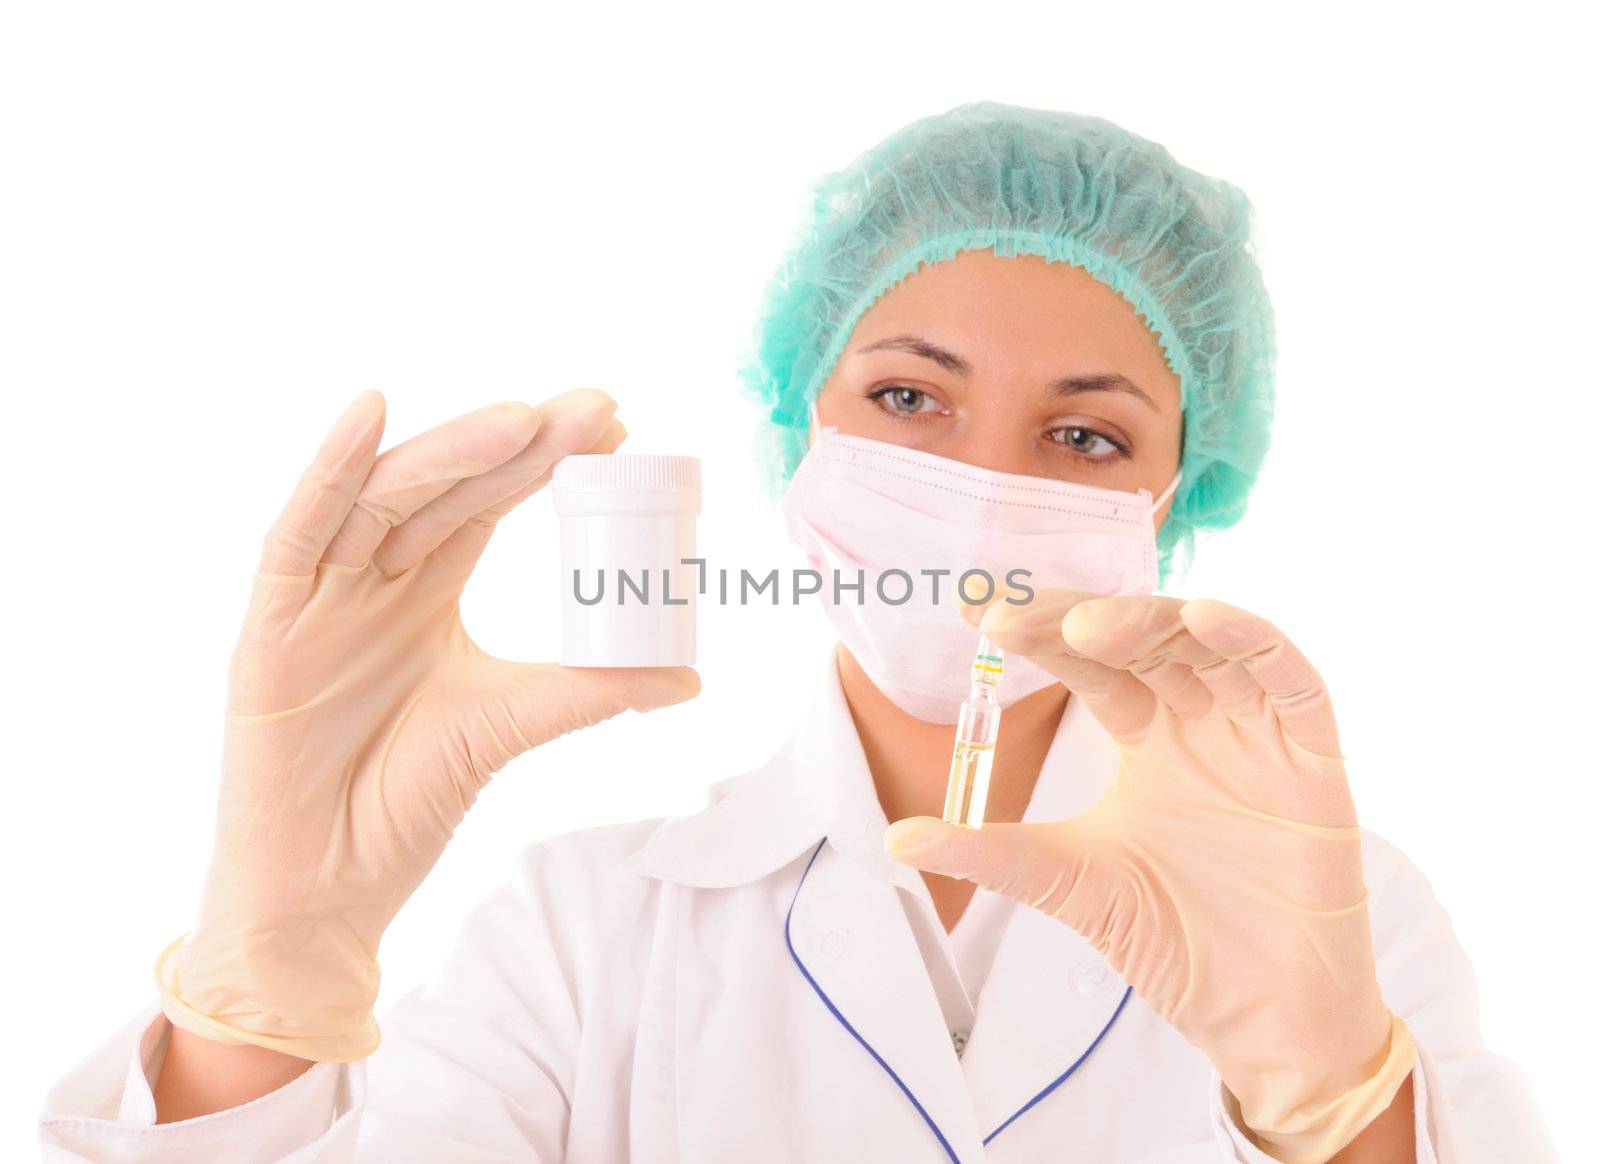 Woman in medical workwear with bottle and ampule with medicines in hands. Isolated on white background. Focus on hands.